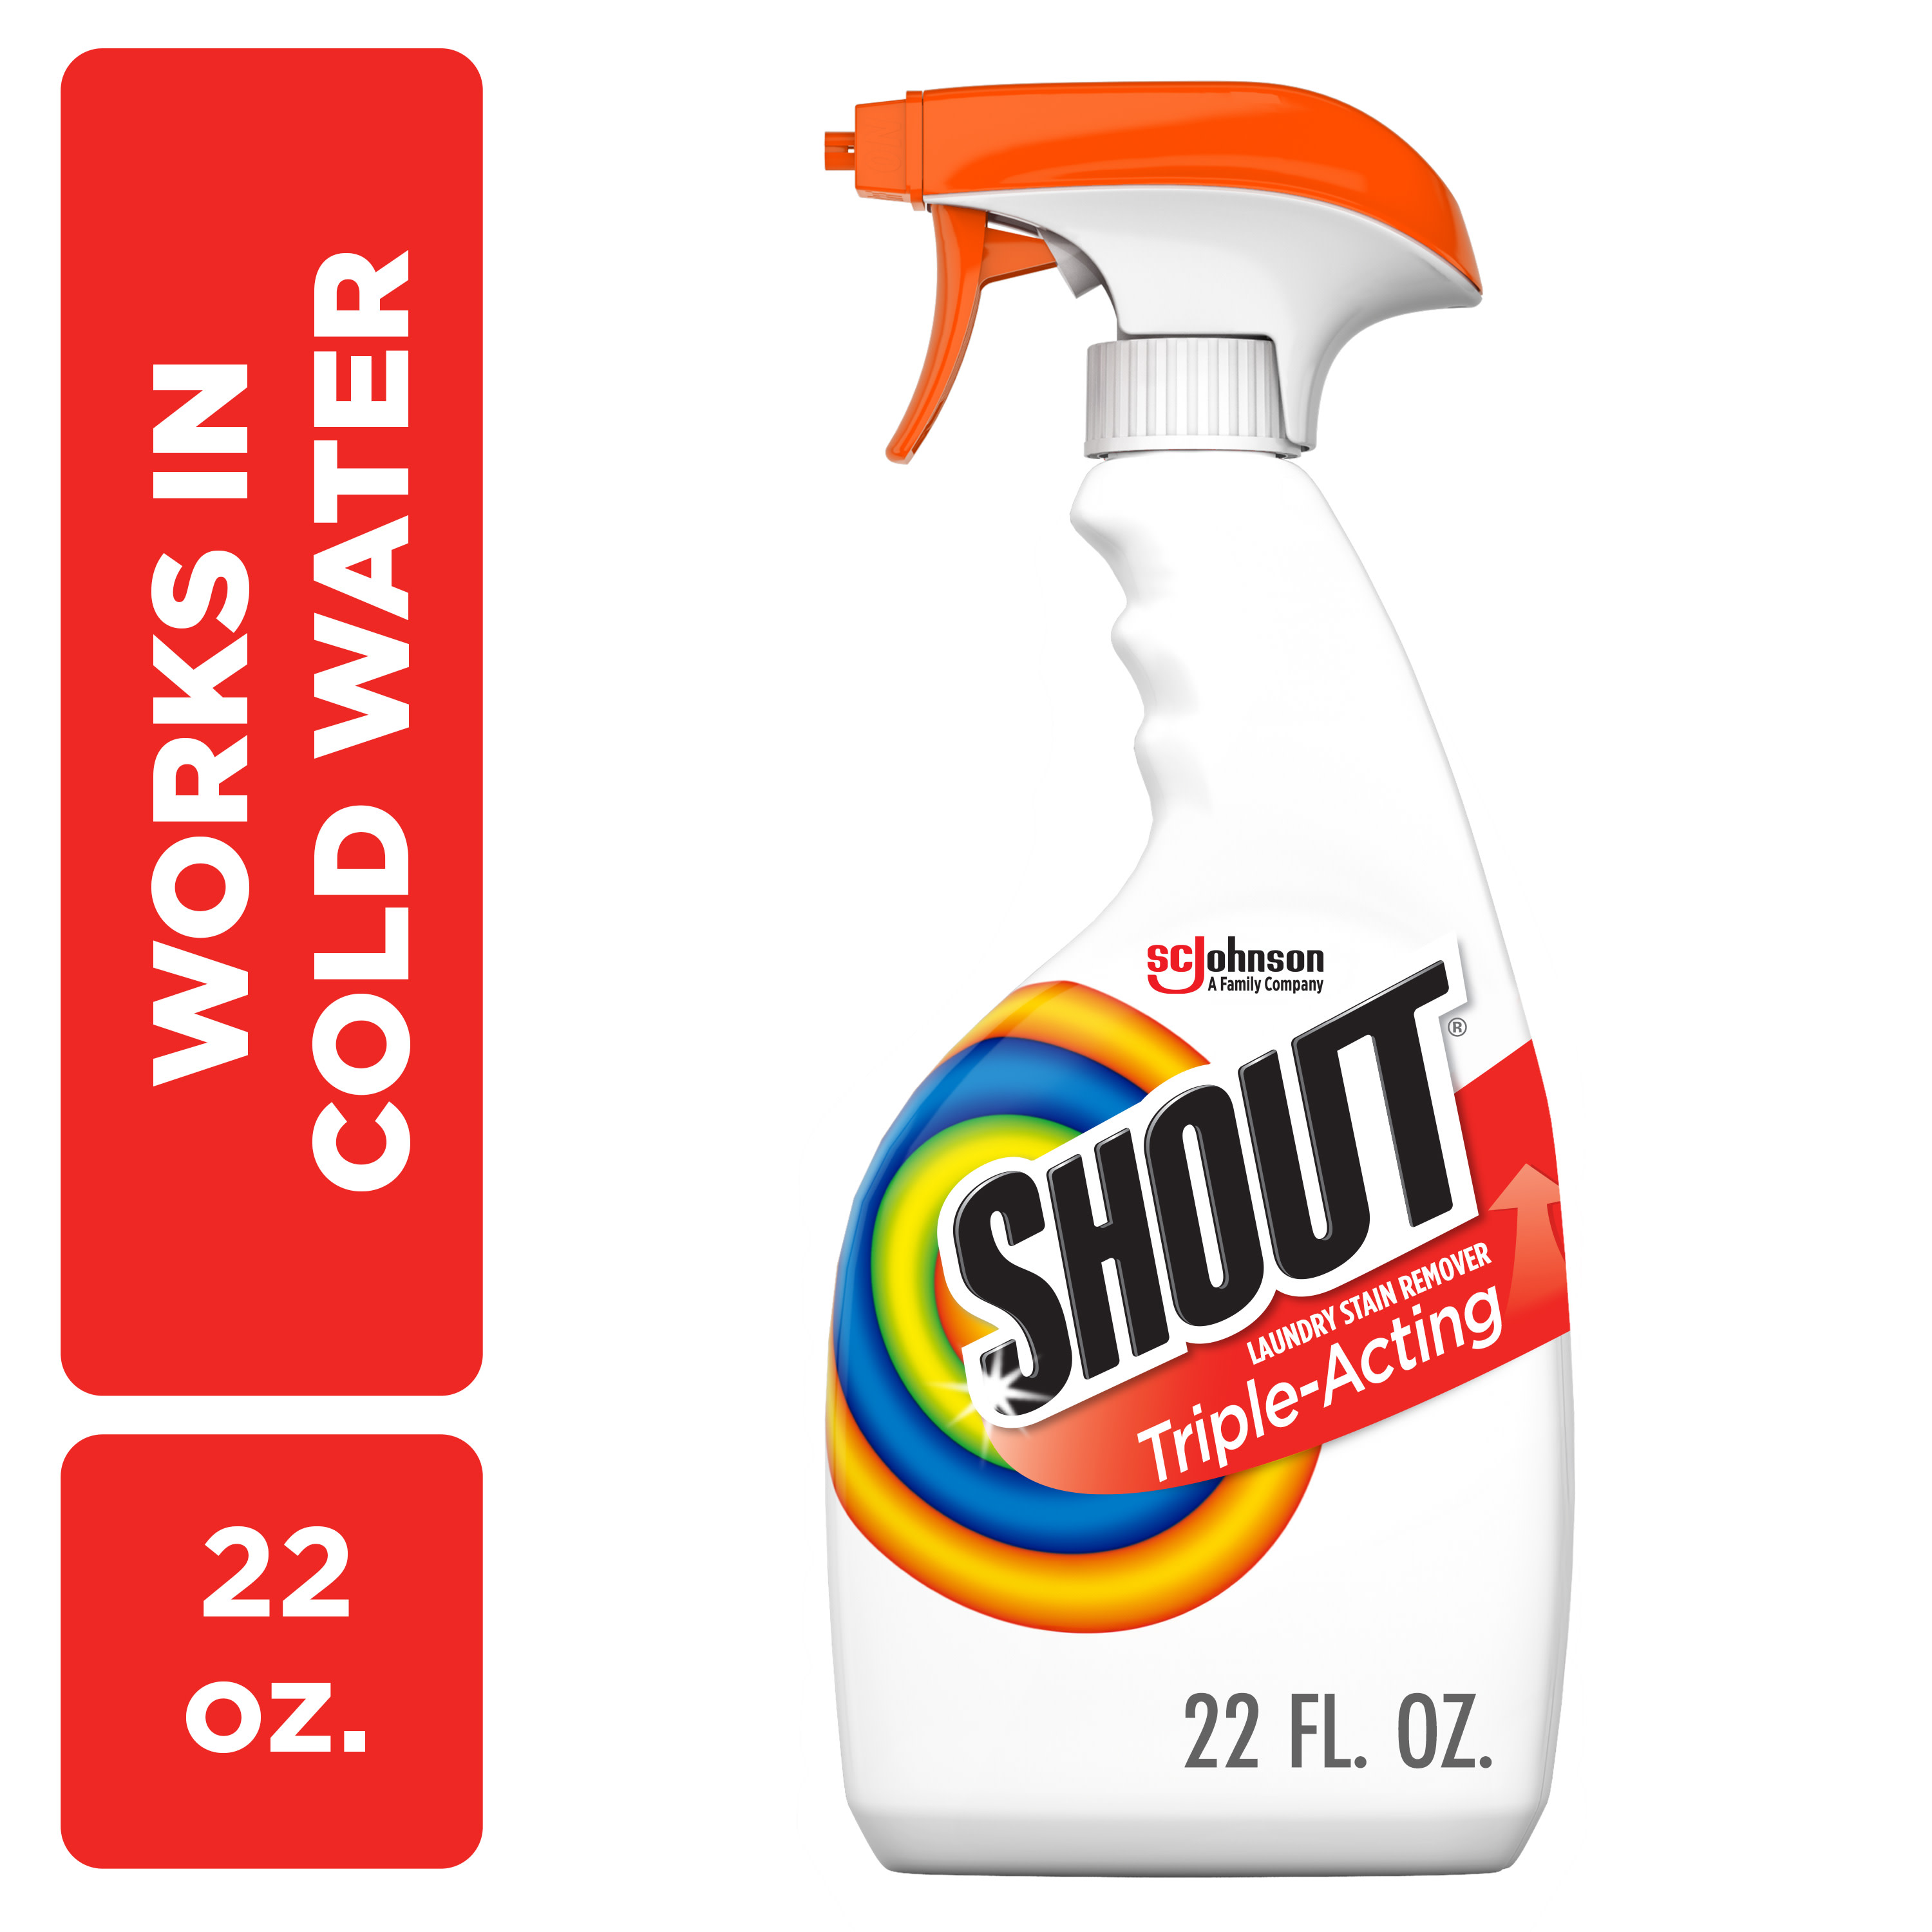 Shout Triple-Acting, Laundry Stain Remover, 22 Ounce - image 1 of 13